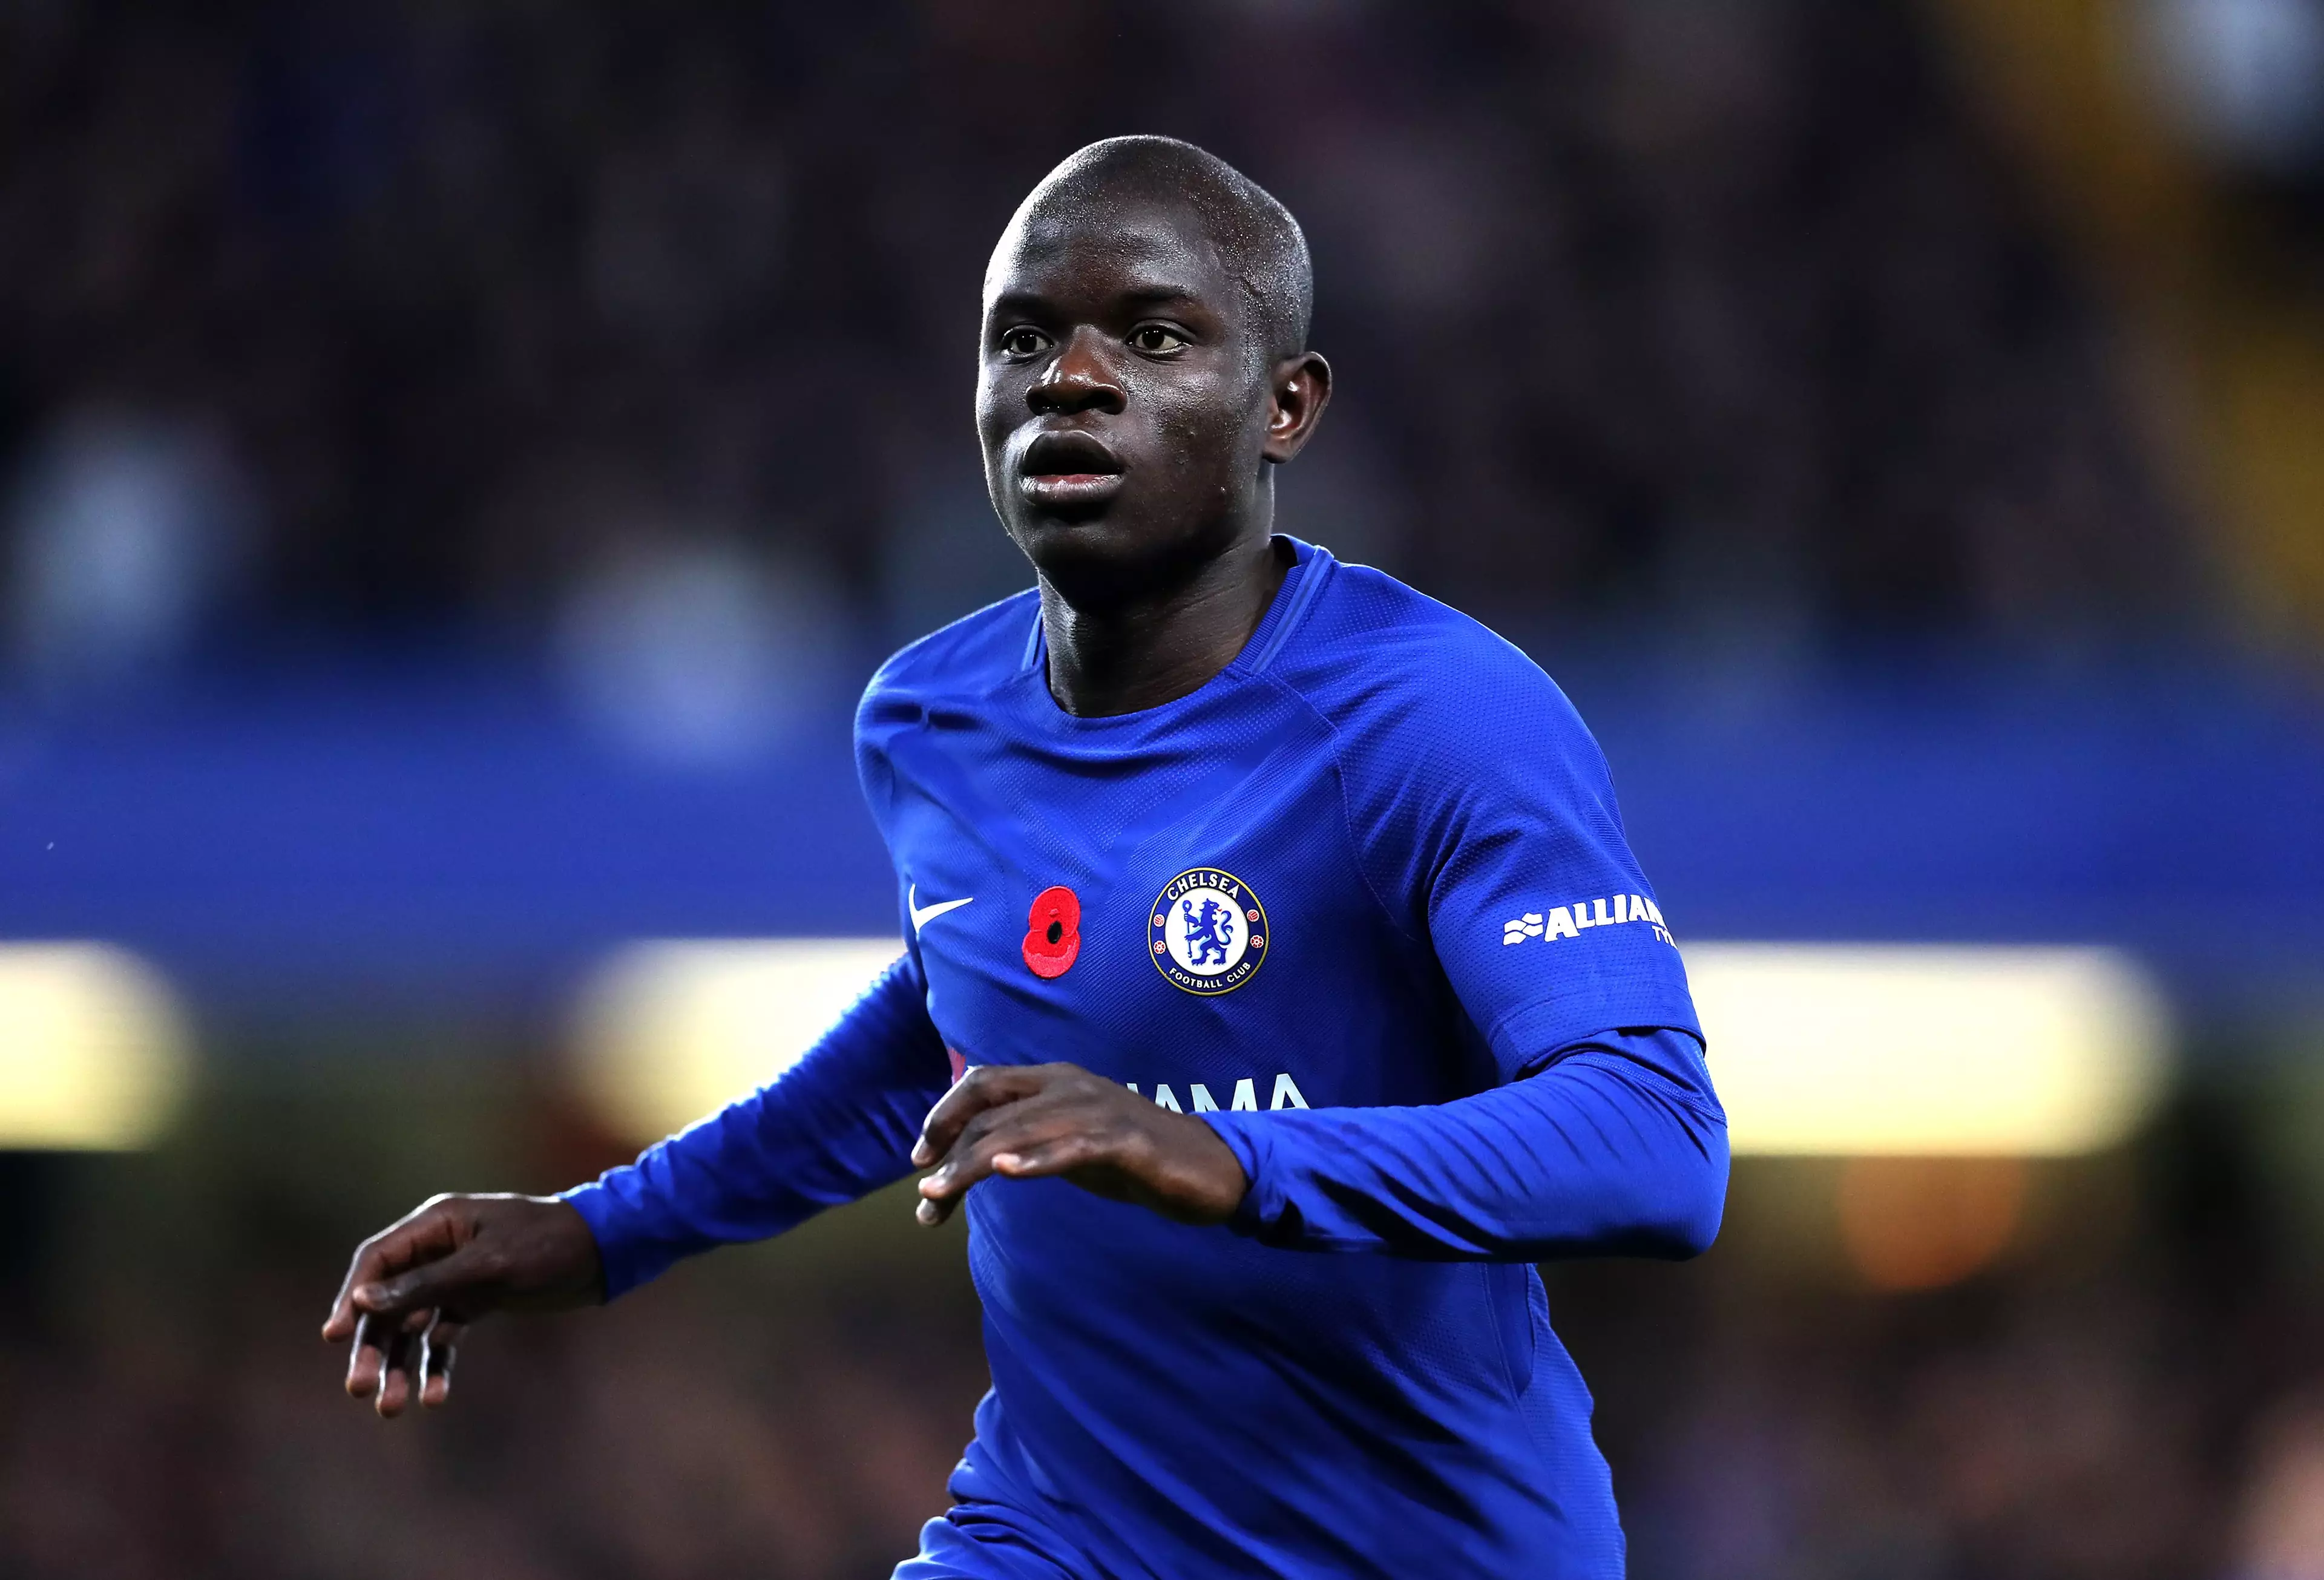 Kante has won league titles with Leicester and Chelsea in the last two seasons. Image: PA Images